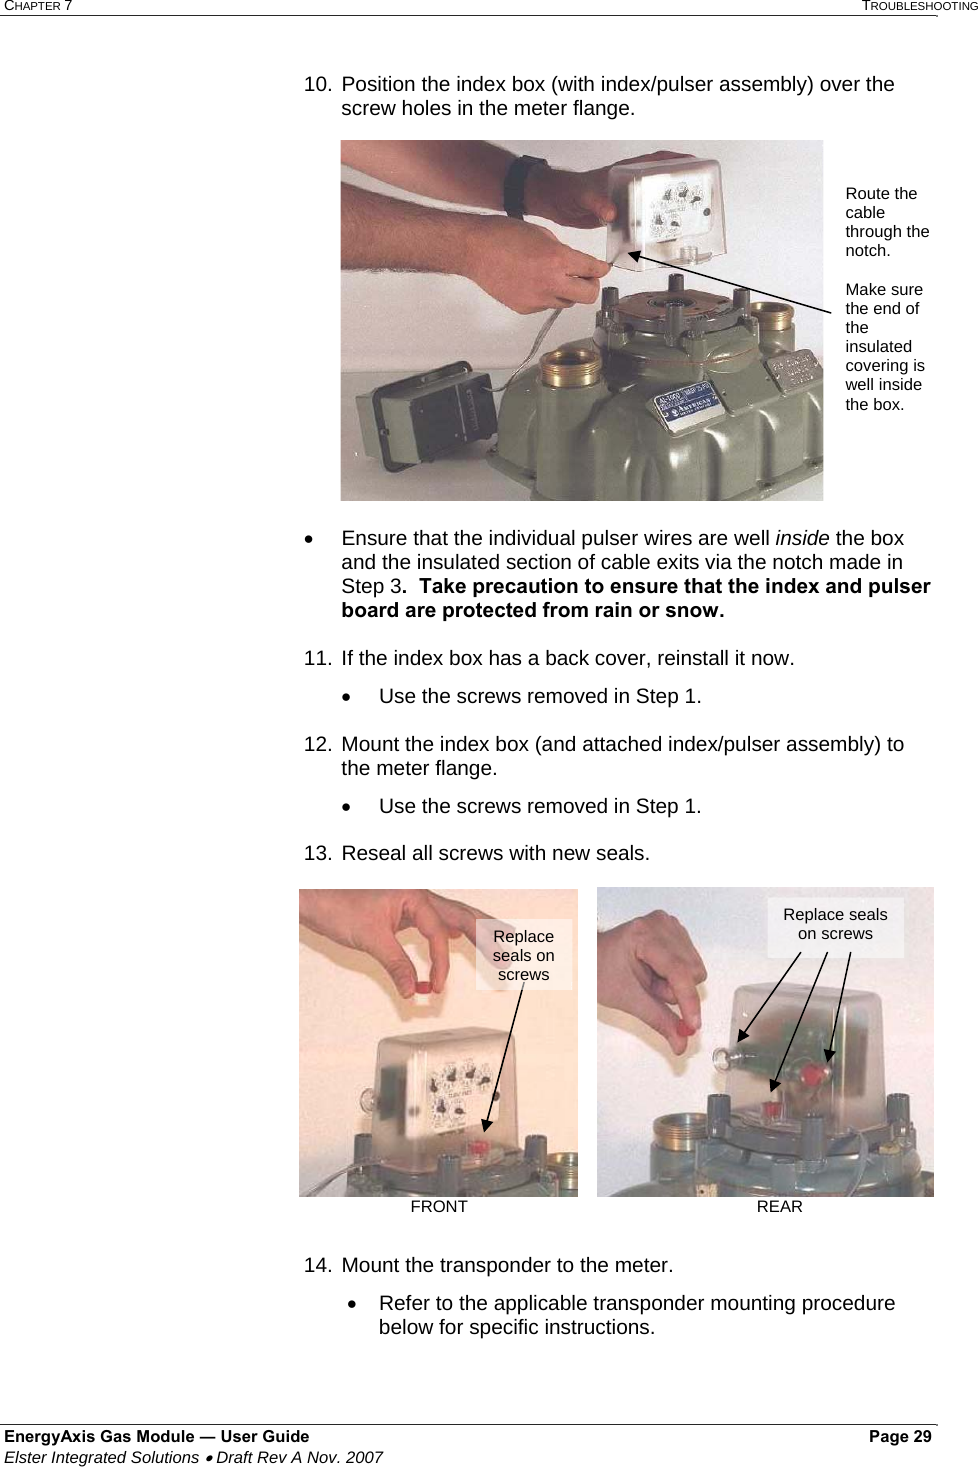 CHAPTER 7   TROUBLESHOOTING EnergyAxis Gas Module ― User Guide   Page 29  Elster Integrated Solutions • Draft Rev A Nov. 2007  10. Position the index box (with index/pulser assembly) over the screw holes in the meter flange.  •  Ensure that the individual pulser wires are well inside the box and the insulated section of cable exits via the notch made in Step 3.  Take precaution to ensure that the index and pulser board are protected from rain or snow.  11. If the index box has a back cover, reinstall it now. •  Use the screws removed in Step 1.  12. Mount the index box (and attached index/pulser assembly) to the meter flange. •  Use the screws removed in Step 1.    13. Reseal all screws with new seals.  14. Mount the transponder to the meter.   •  Refer to the applicable transponder mounting procedure below for specific instructions.   Route the cable through the notch.   Make sure the end of the insulated covering is well inside the box.   Replace seals on screws Replace seals on screwsFRONT                  REAR 